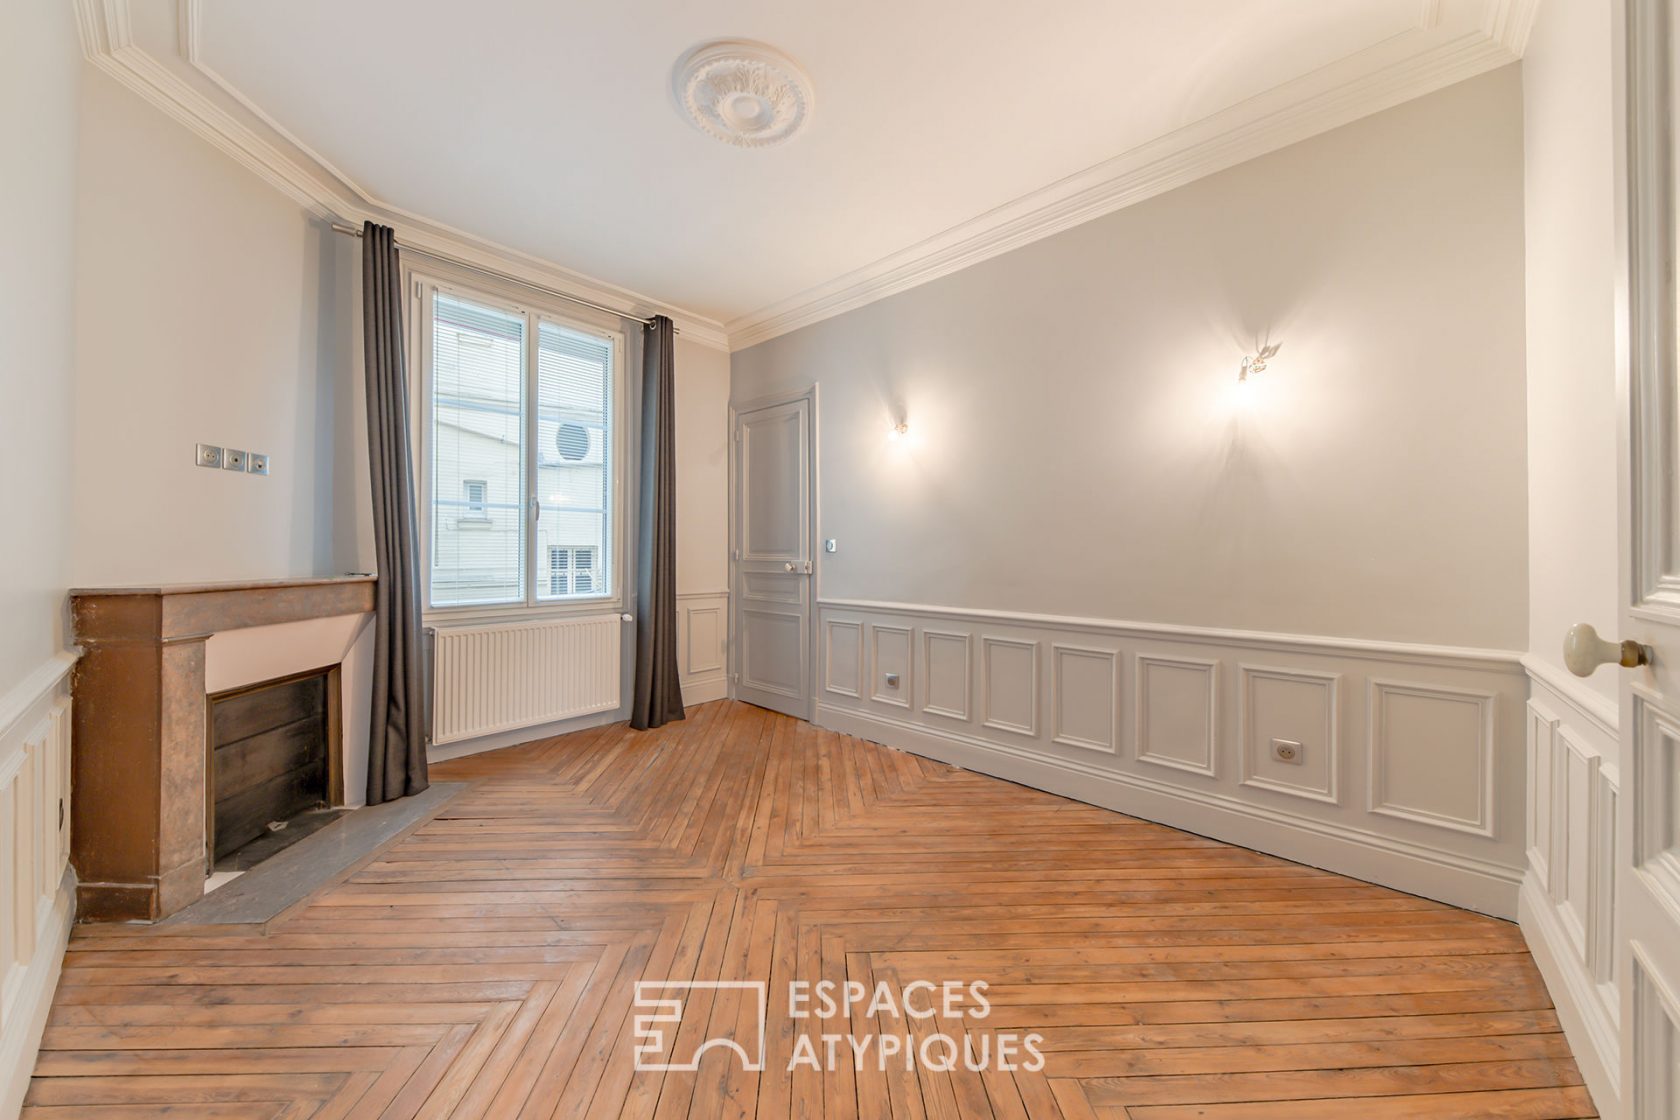 Haussmannian renovated in the heart of the historic district